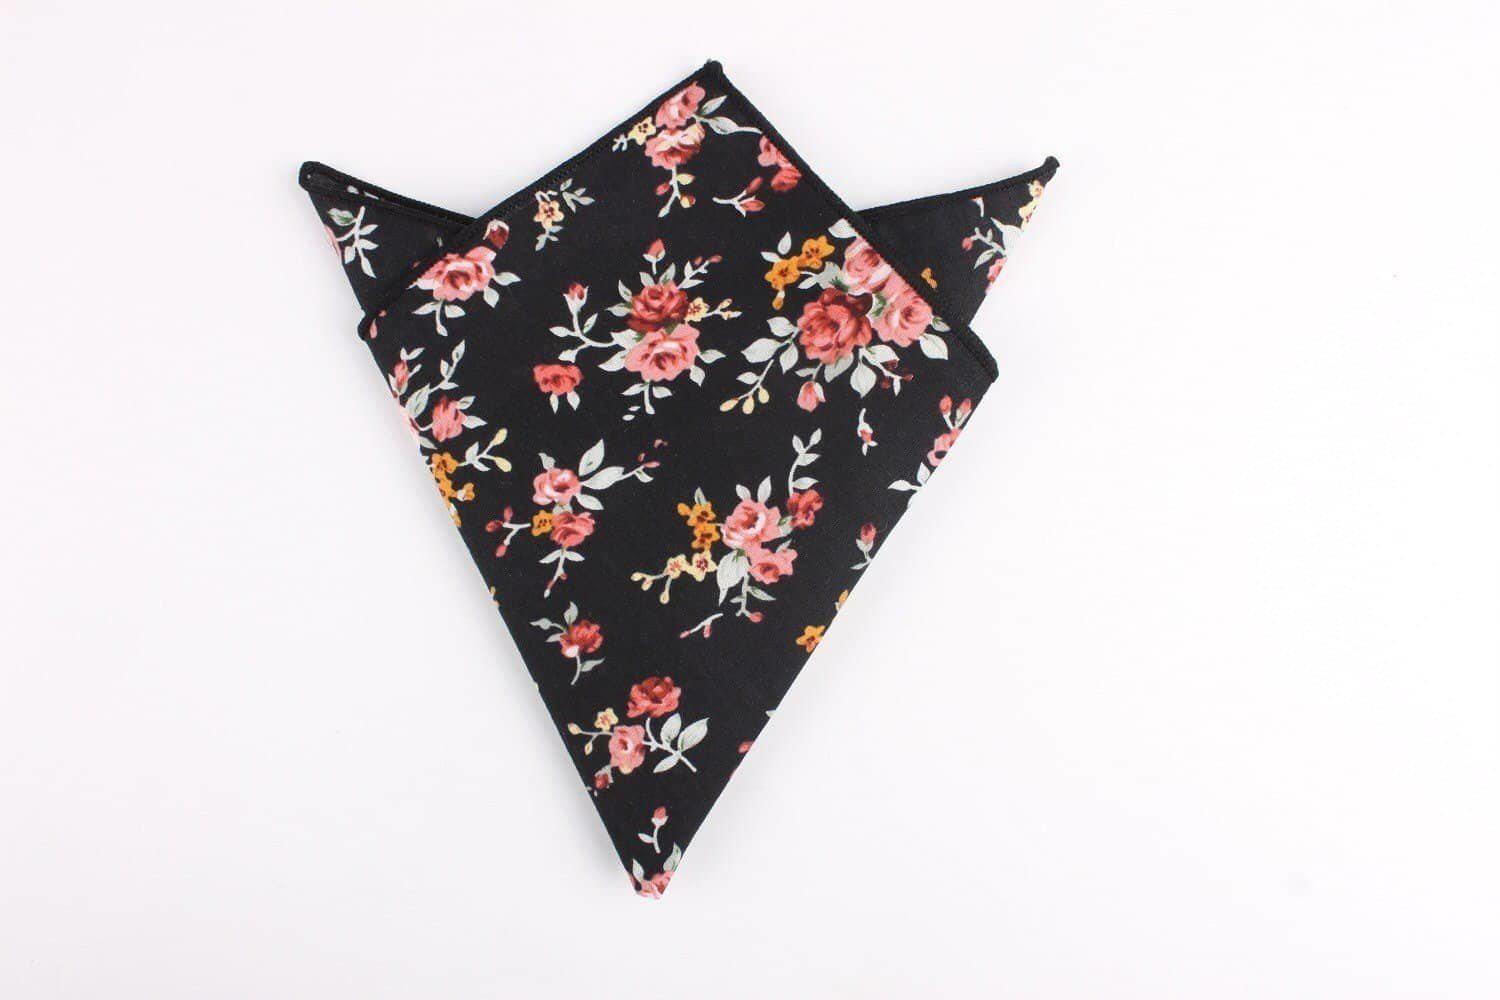 Black and Pink Floral Pocket Square JOE Mytieshop Black and Pink Floral Pocket Square Material CottonItem Length: 23 cm ( 9 inches)Item Width : 22 cm (8.6 inches) Elevate your outfit with this dapper floral pocket square. This pocket square is perfect for dressing up any outfit. With a playful floral print in stylish black, red, pink and orange, this is a must-have for any modern man. With its versatile design, this pocket square is a great addition to any outfit. So whether you&#39;re dressing up f